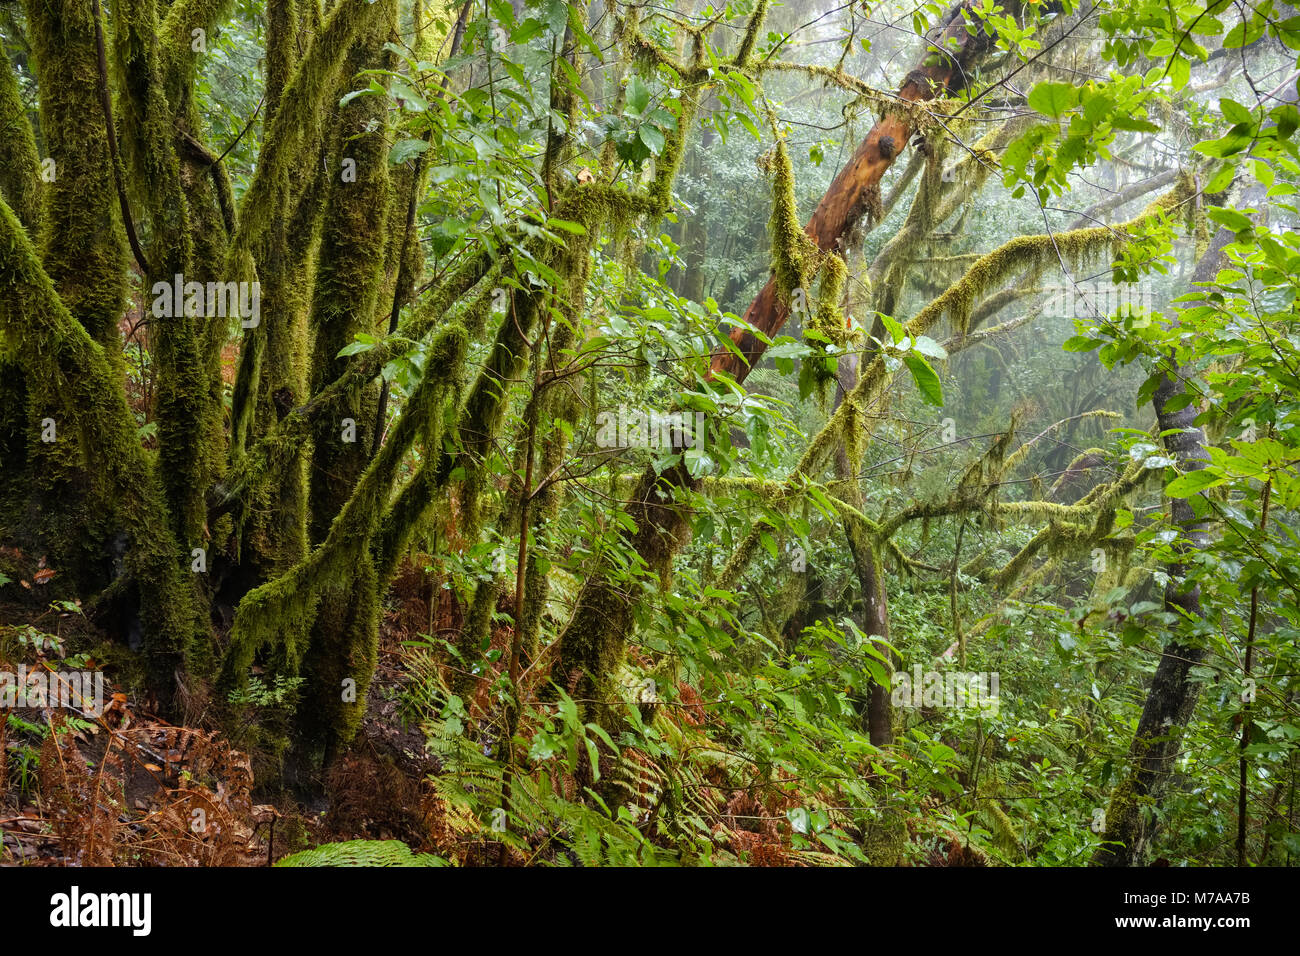 Moss-covered trees in the cloud forest, Garajonay National Park, La Gomera, Canary Islands, Spain Stock Photo